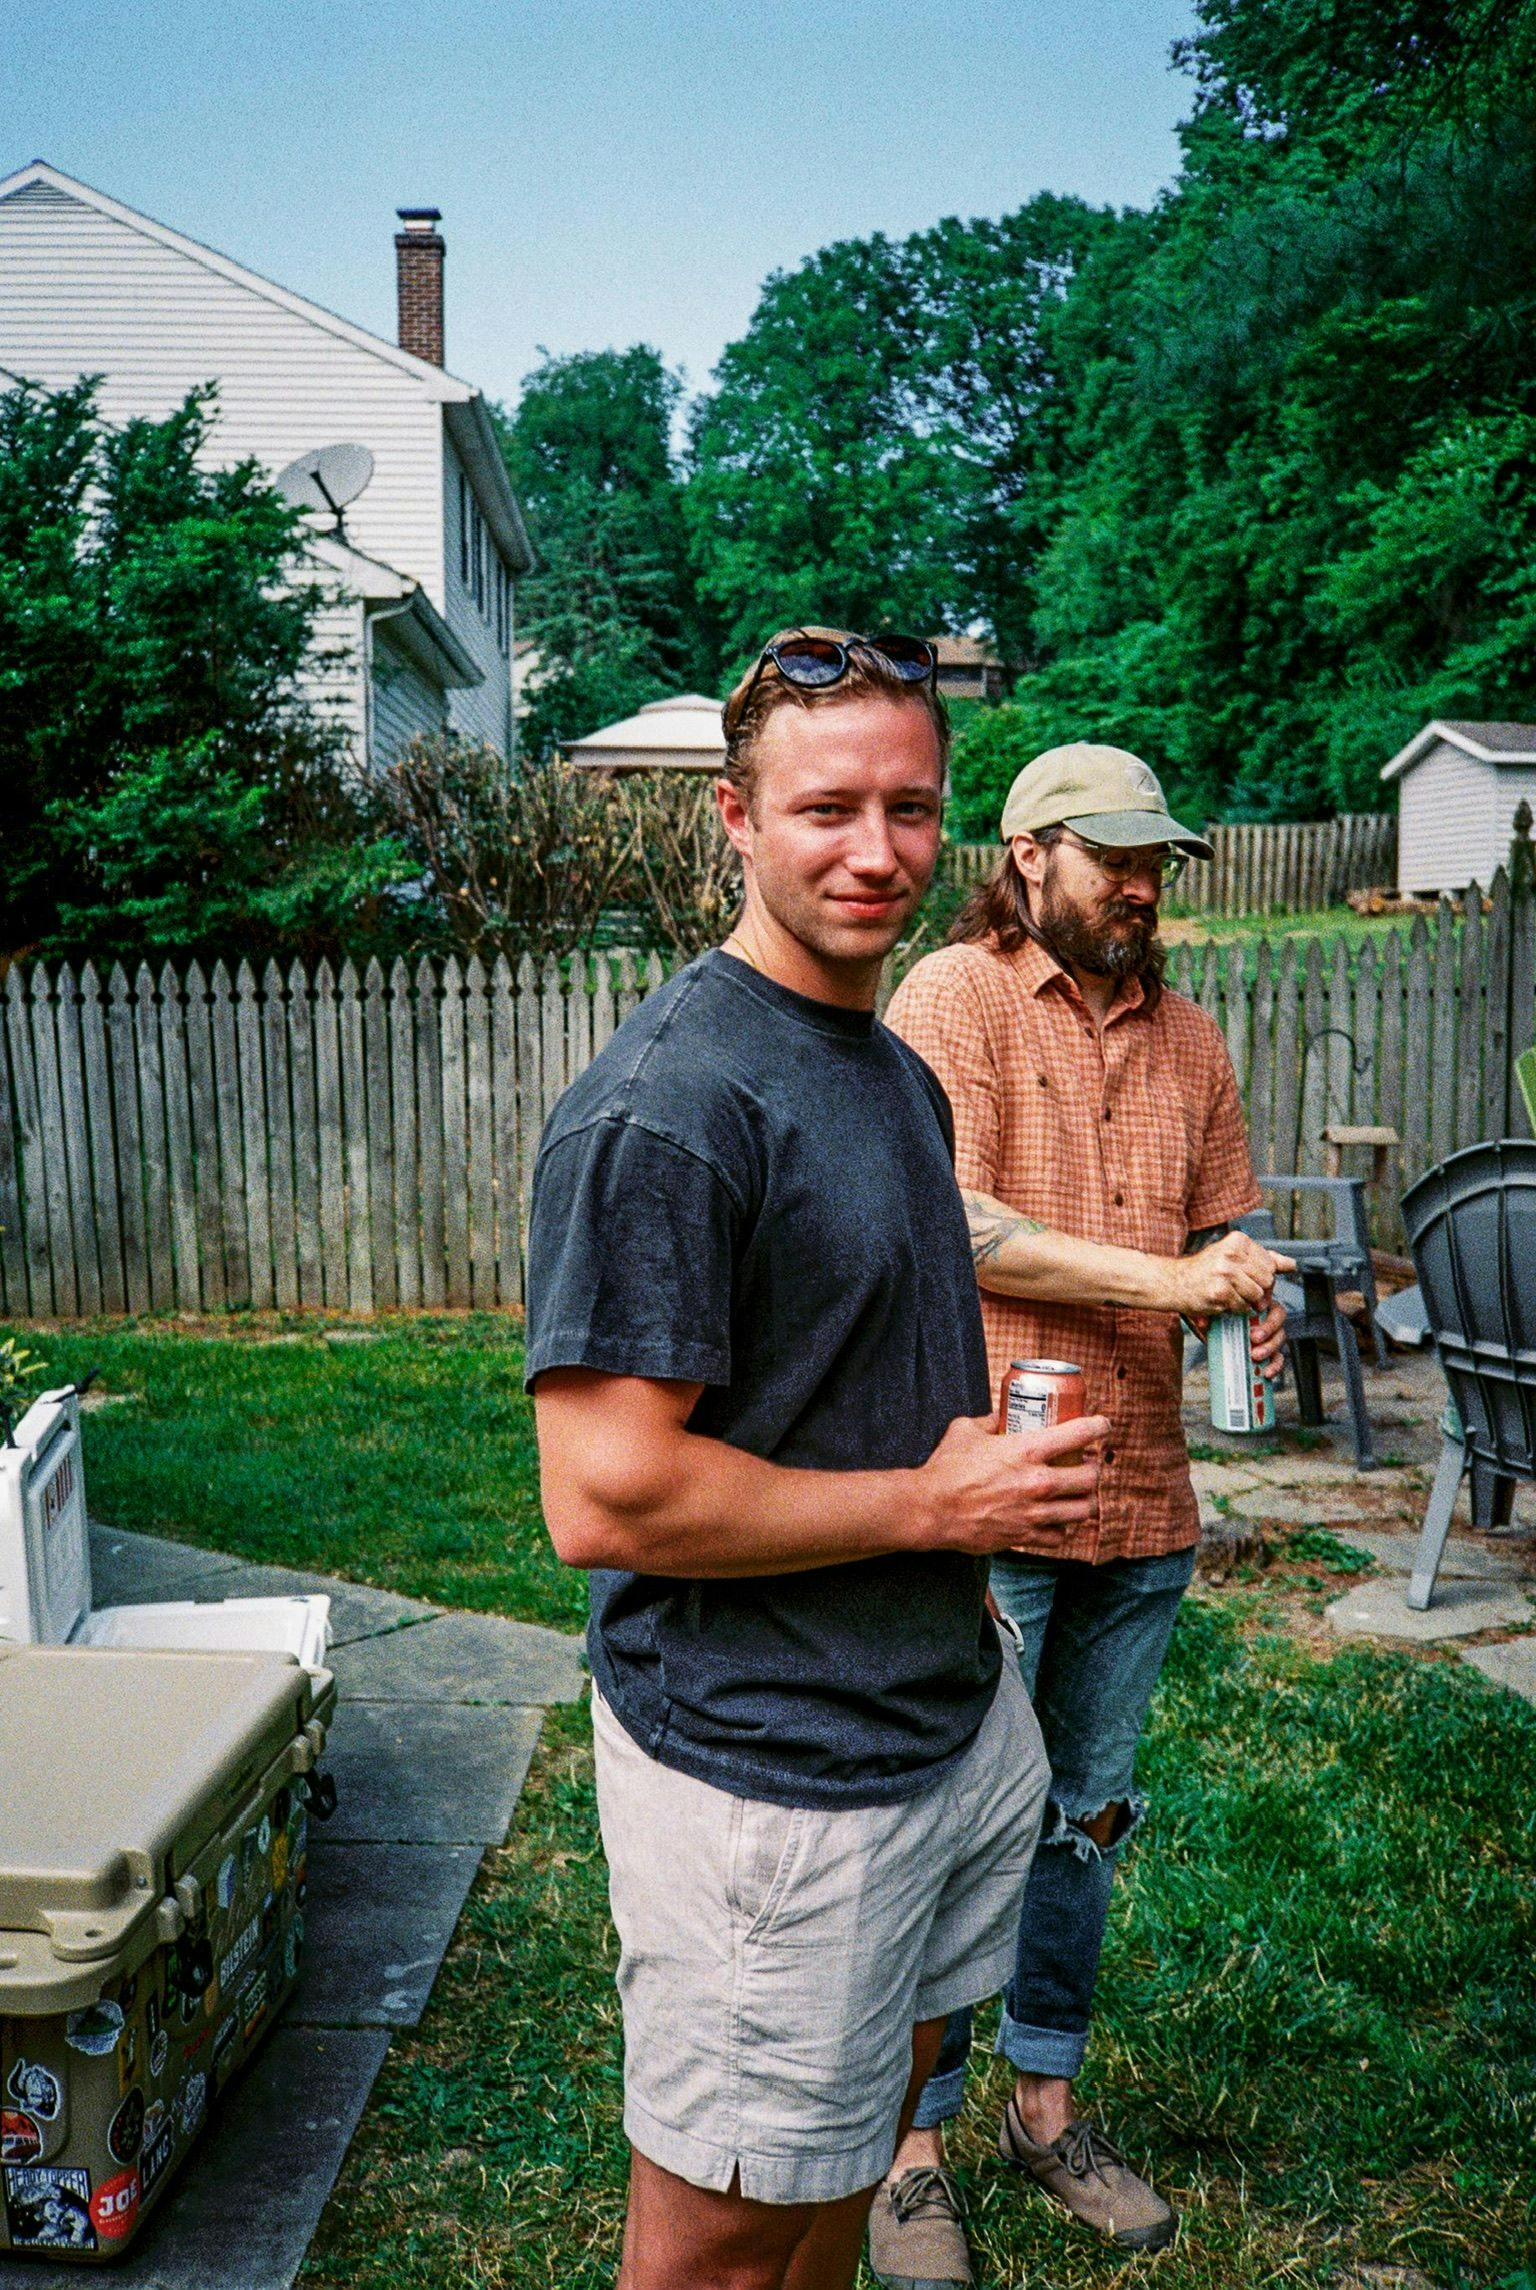 Kegan Sovay and Douglas Kersten at a picnic with a Yeti cooler